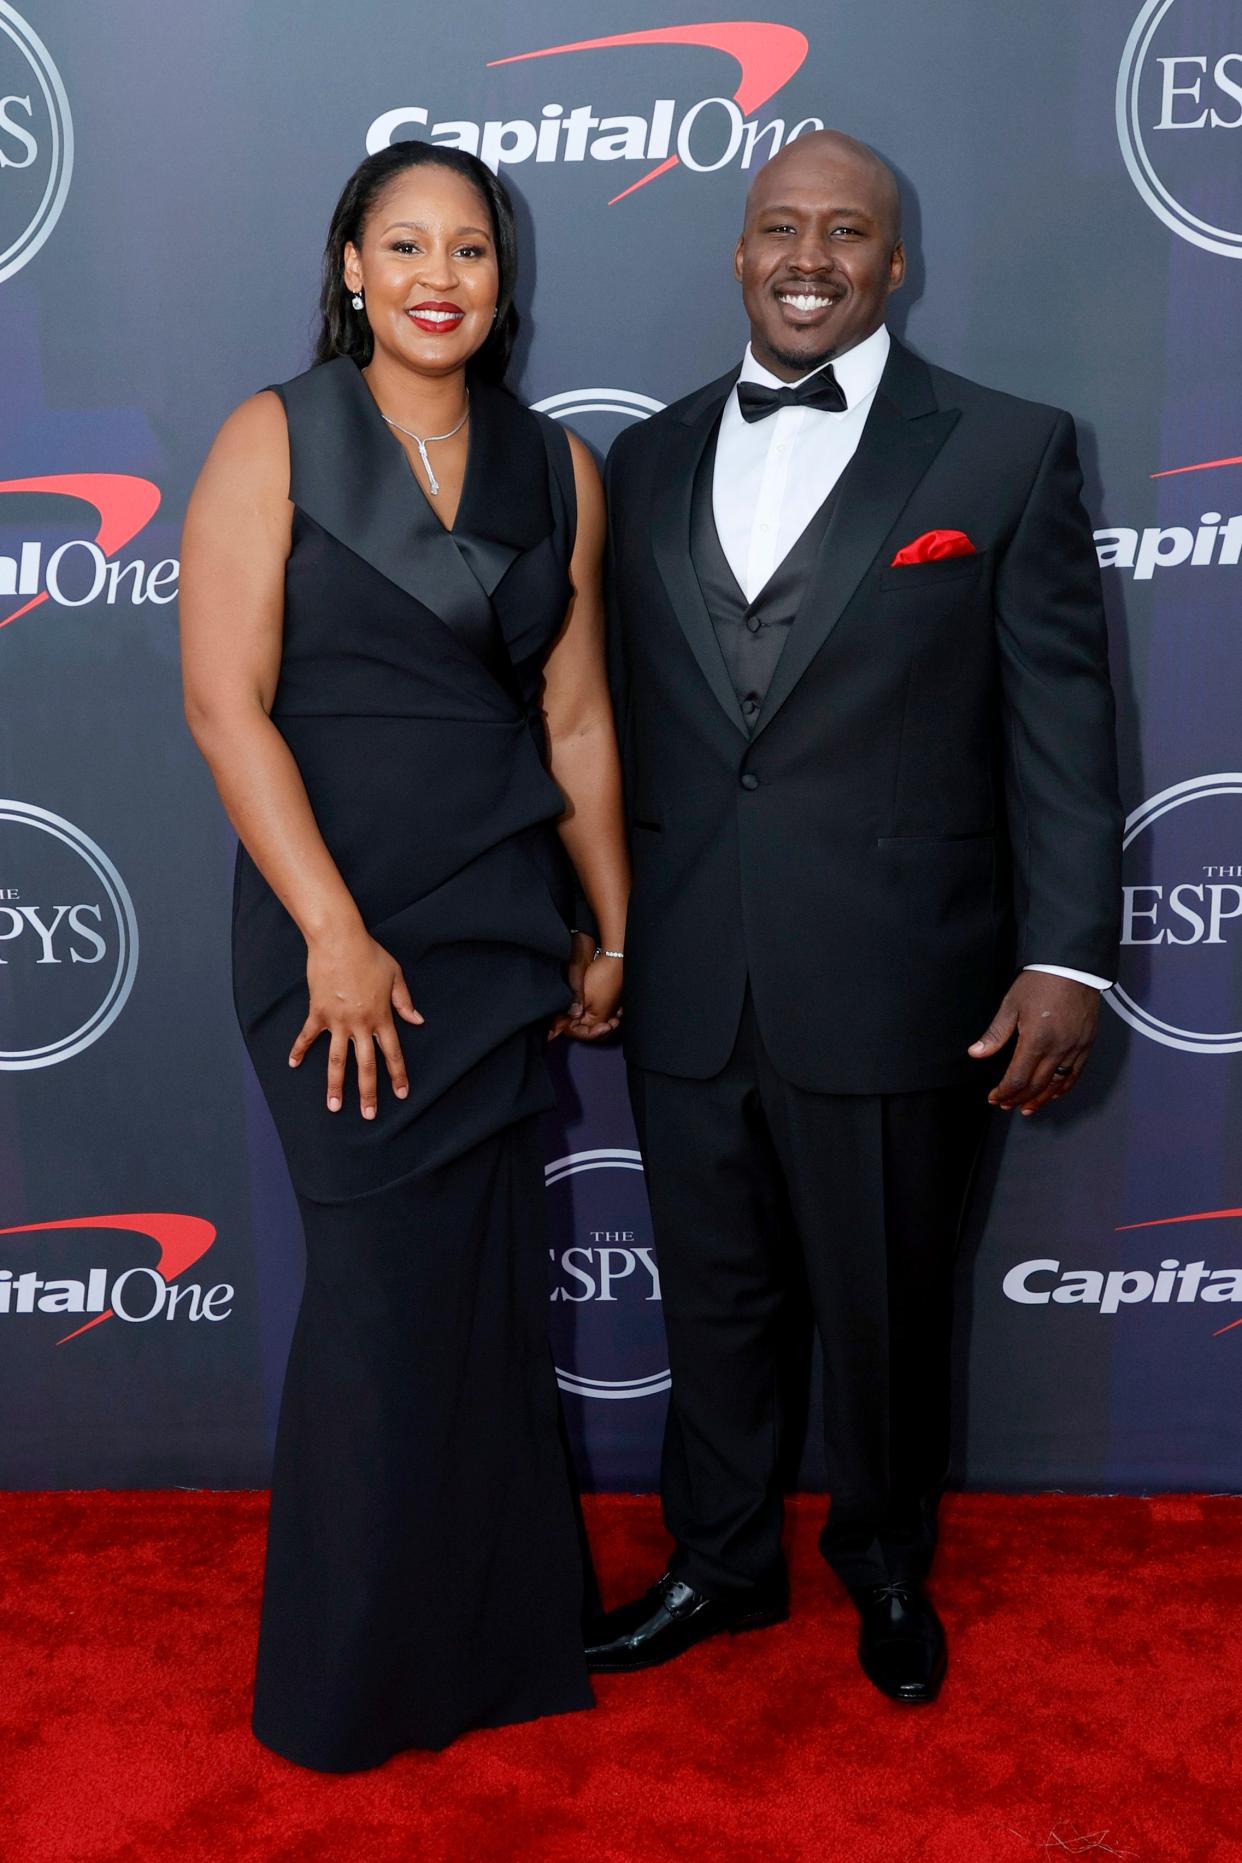 NEW YORK, NEW YORK - JULY 10: (L-R) Maya Moore and Jonathan Irons attend the 2021 ESPY Awards at Rooftop At Pier 17 on July 10, 2021 in New York City. (Photo by Michael Loccisano/Getty Images) ORG XMIT: 775667120 ORIG FILE ID: 1328056719